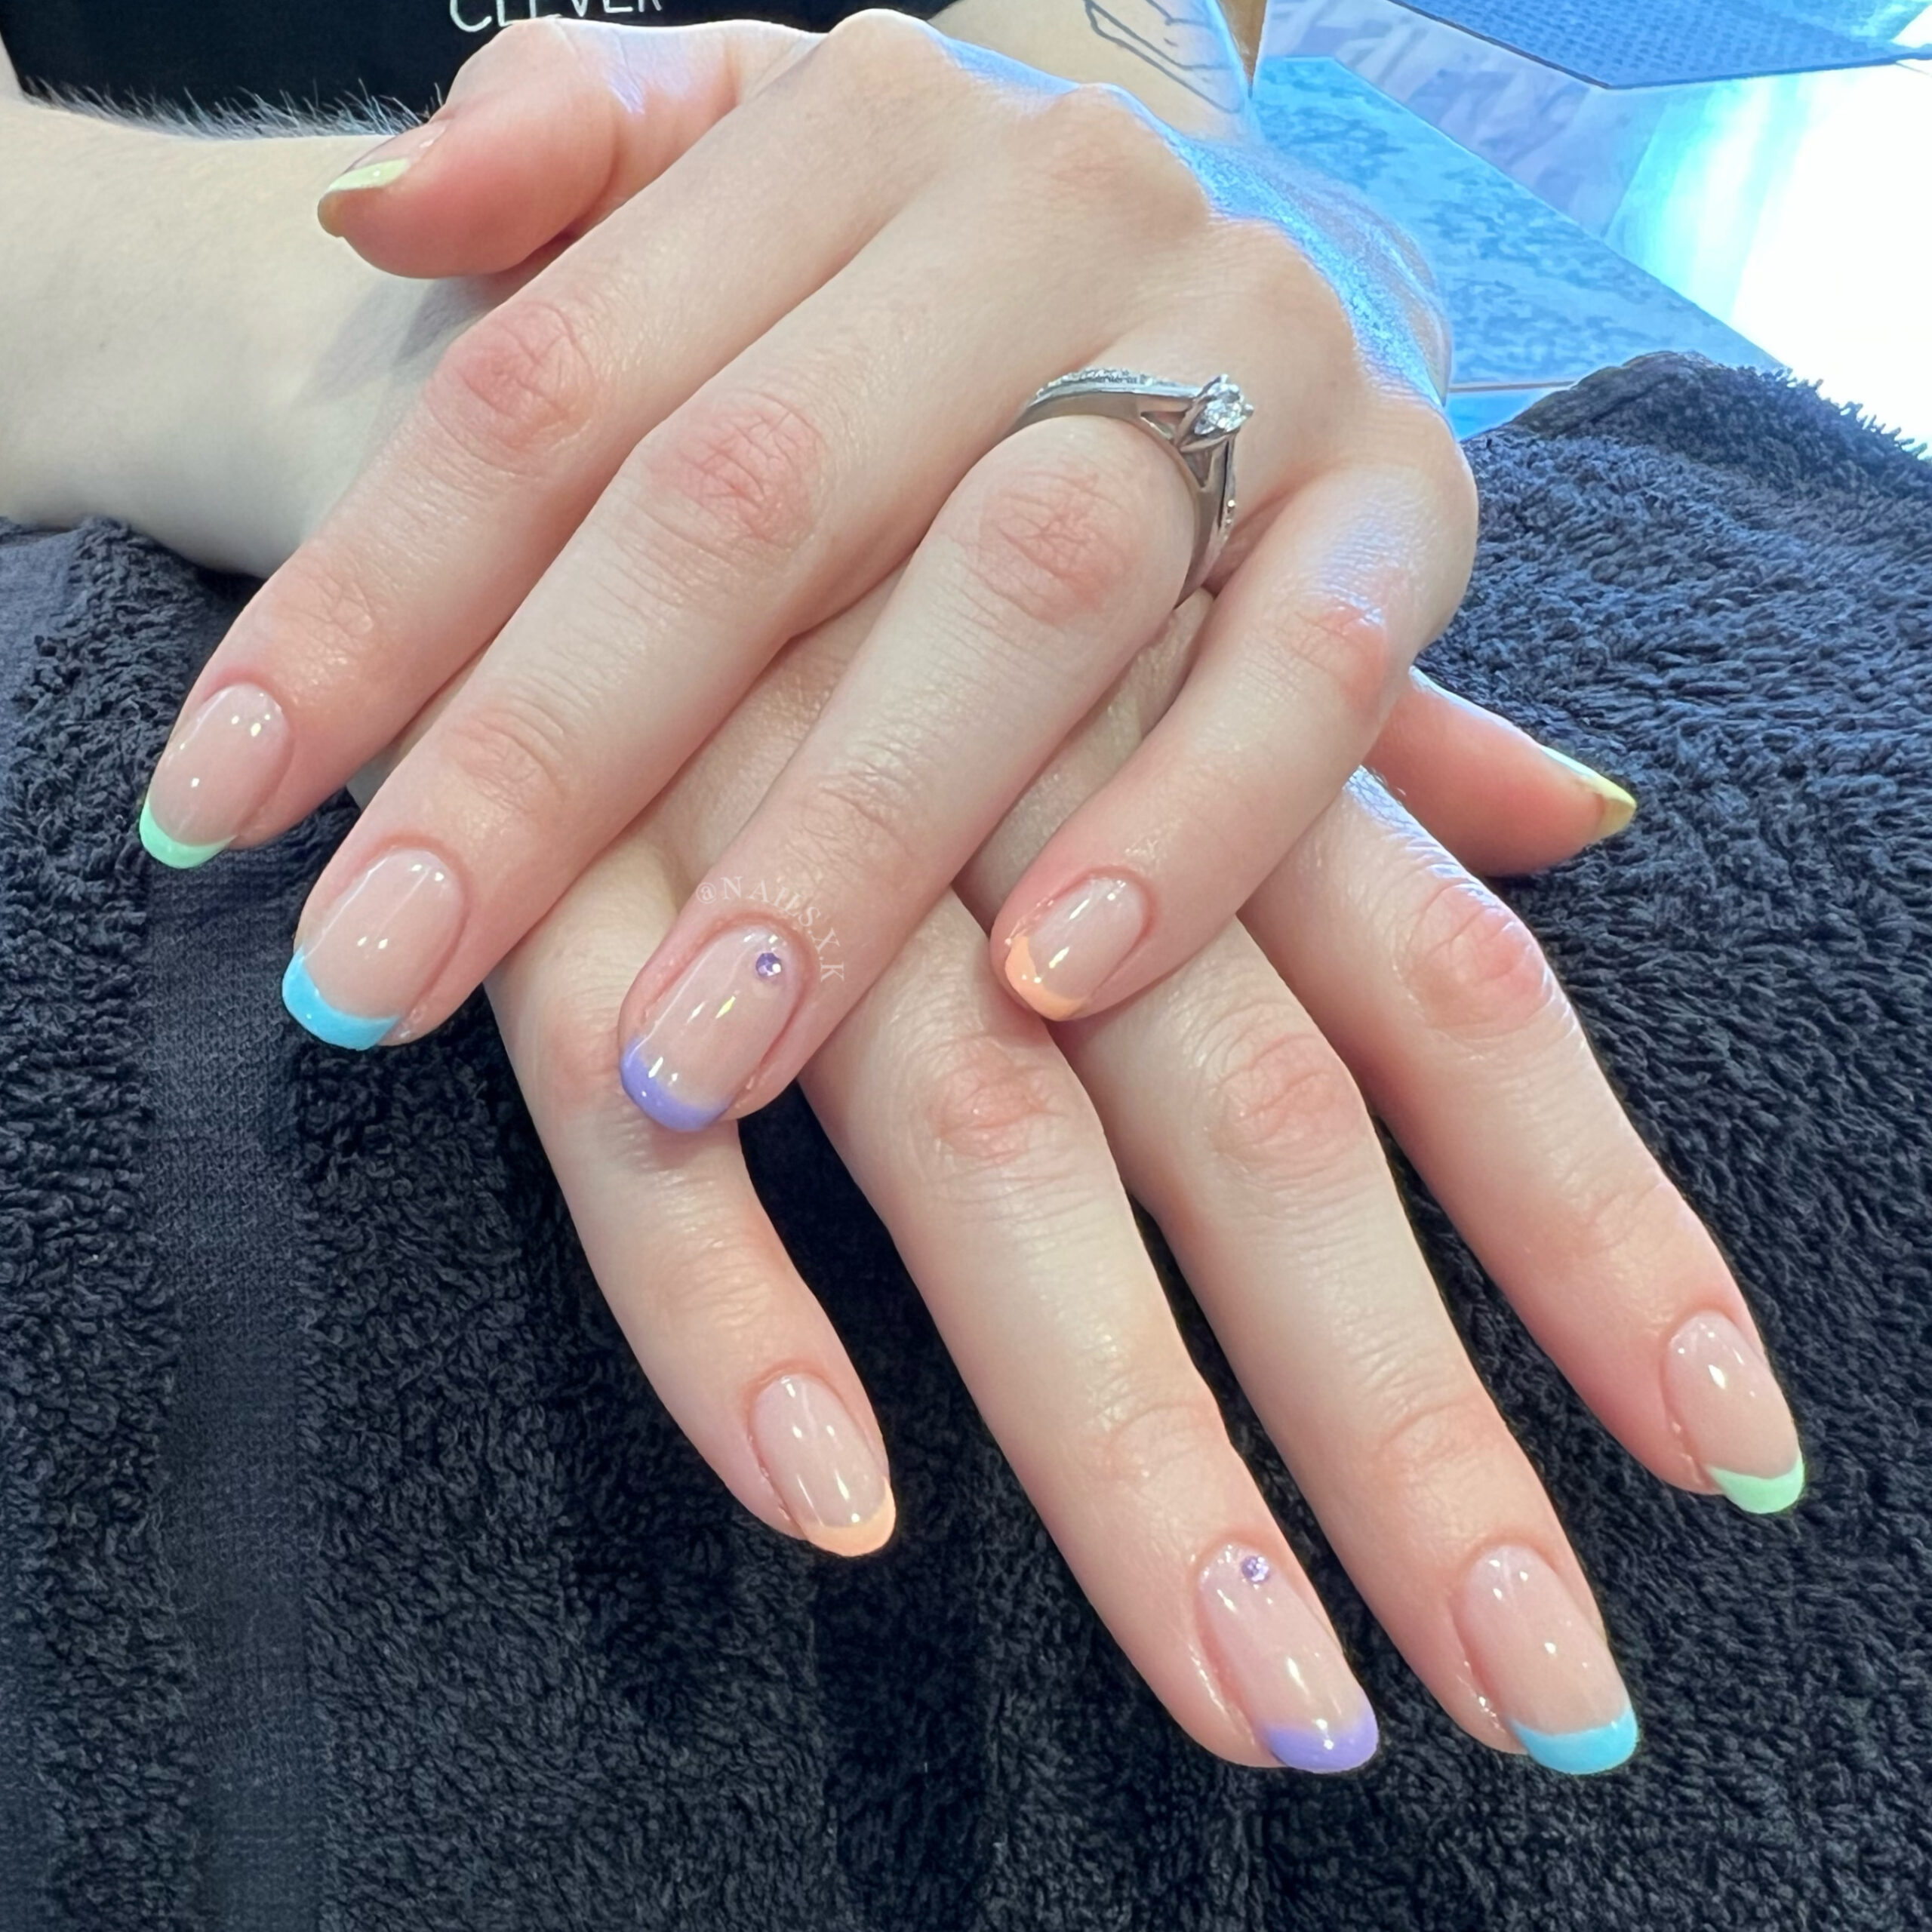 Rainbow french tip gel manicure. Nails by K